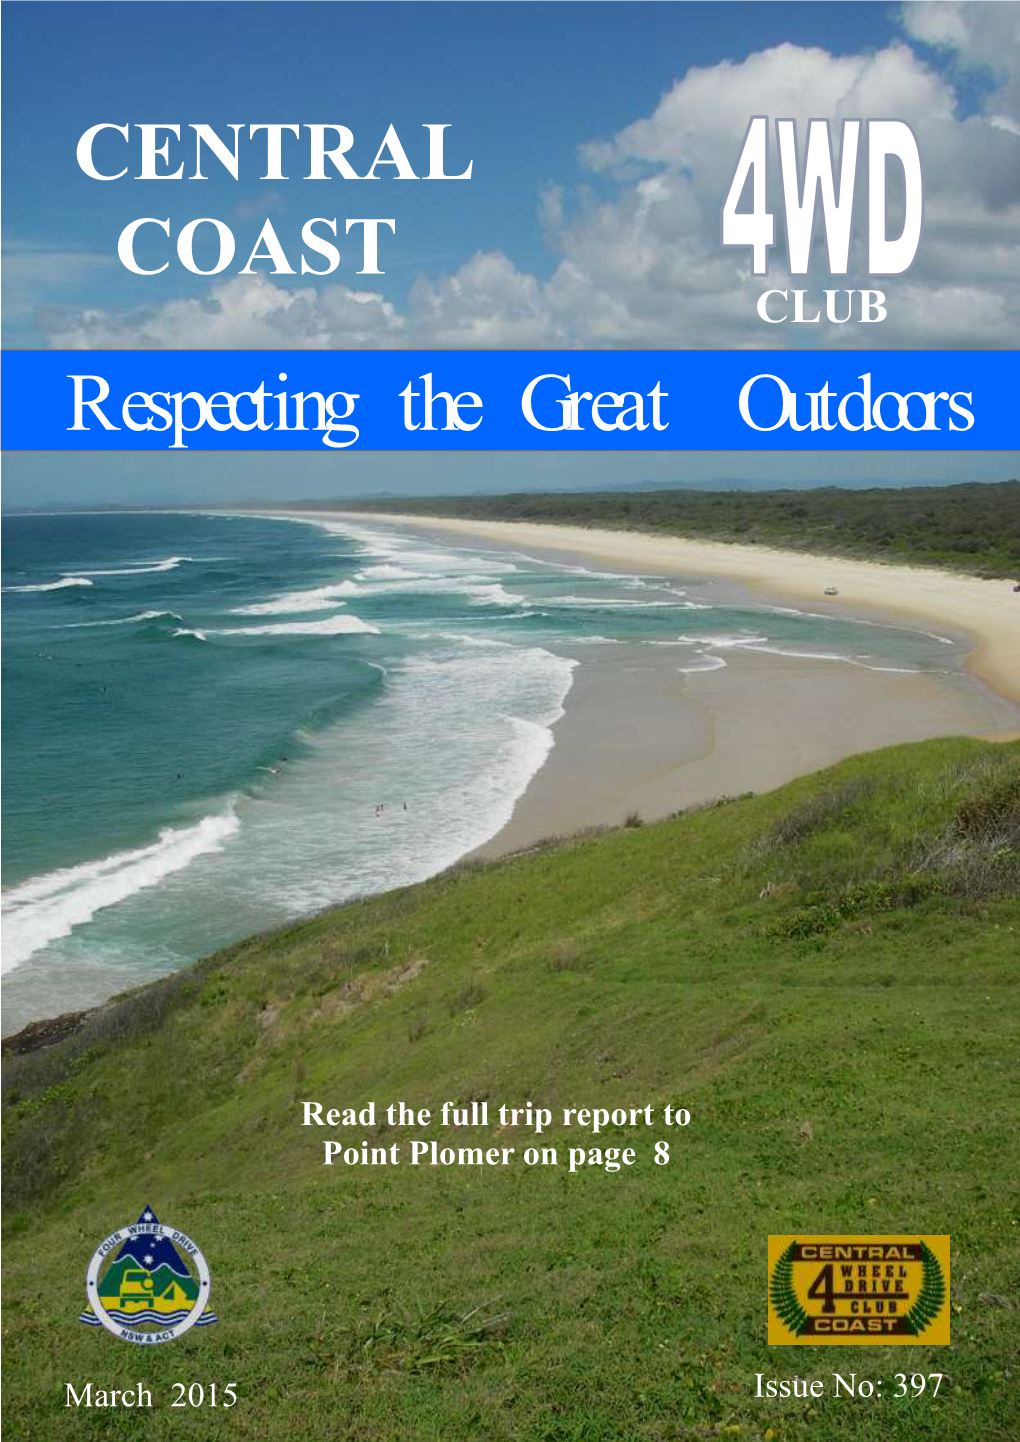 CENTRAL COAST Respecting the Great Outdoors